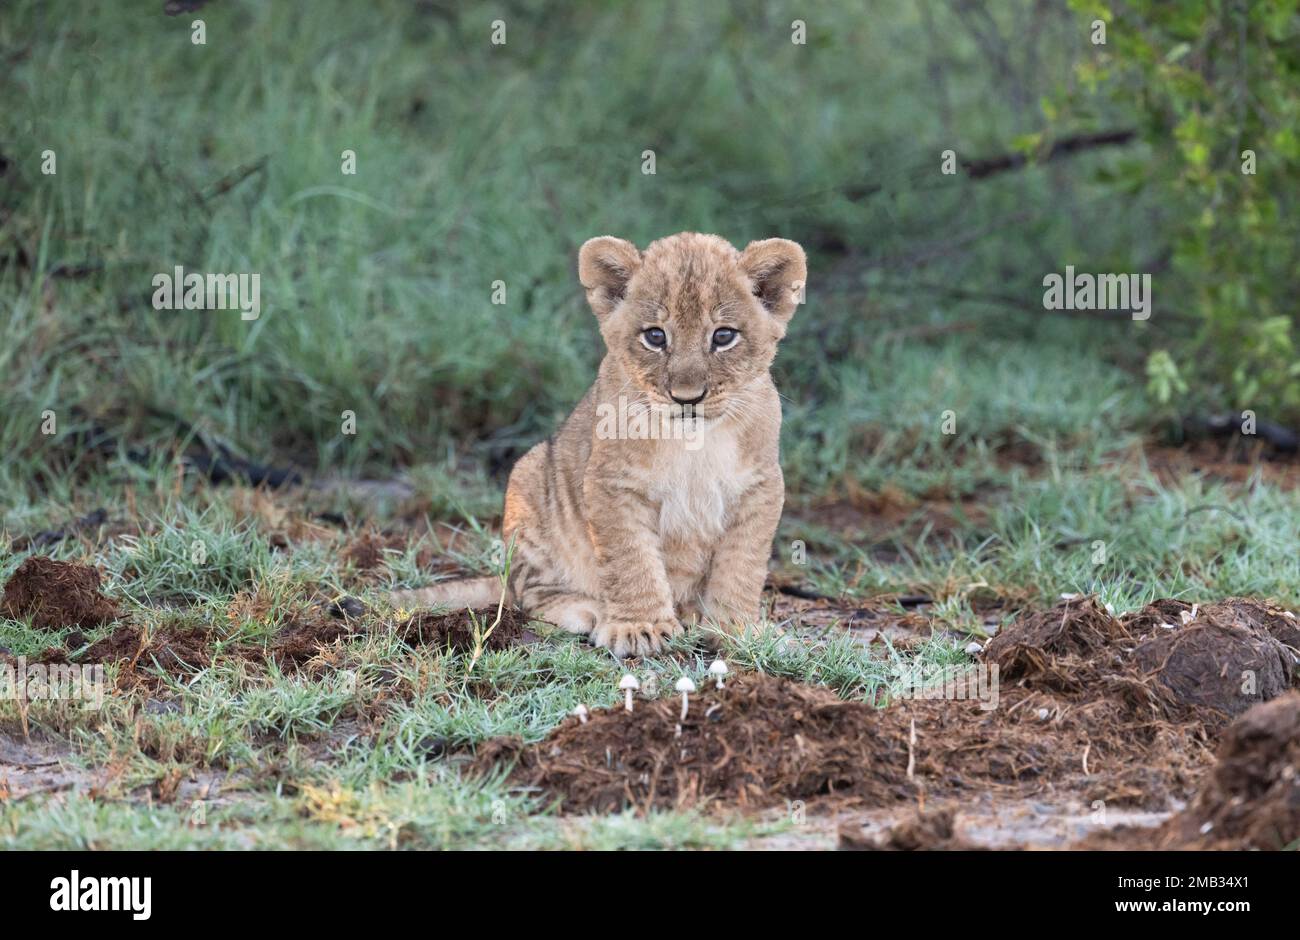 ADORABLE images of the cutest lion cubs sitting and posing for a portrait photoshoot have been captured in Little Vumbura Camp, Okavango Delta, Botswa Stock Photo